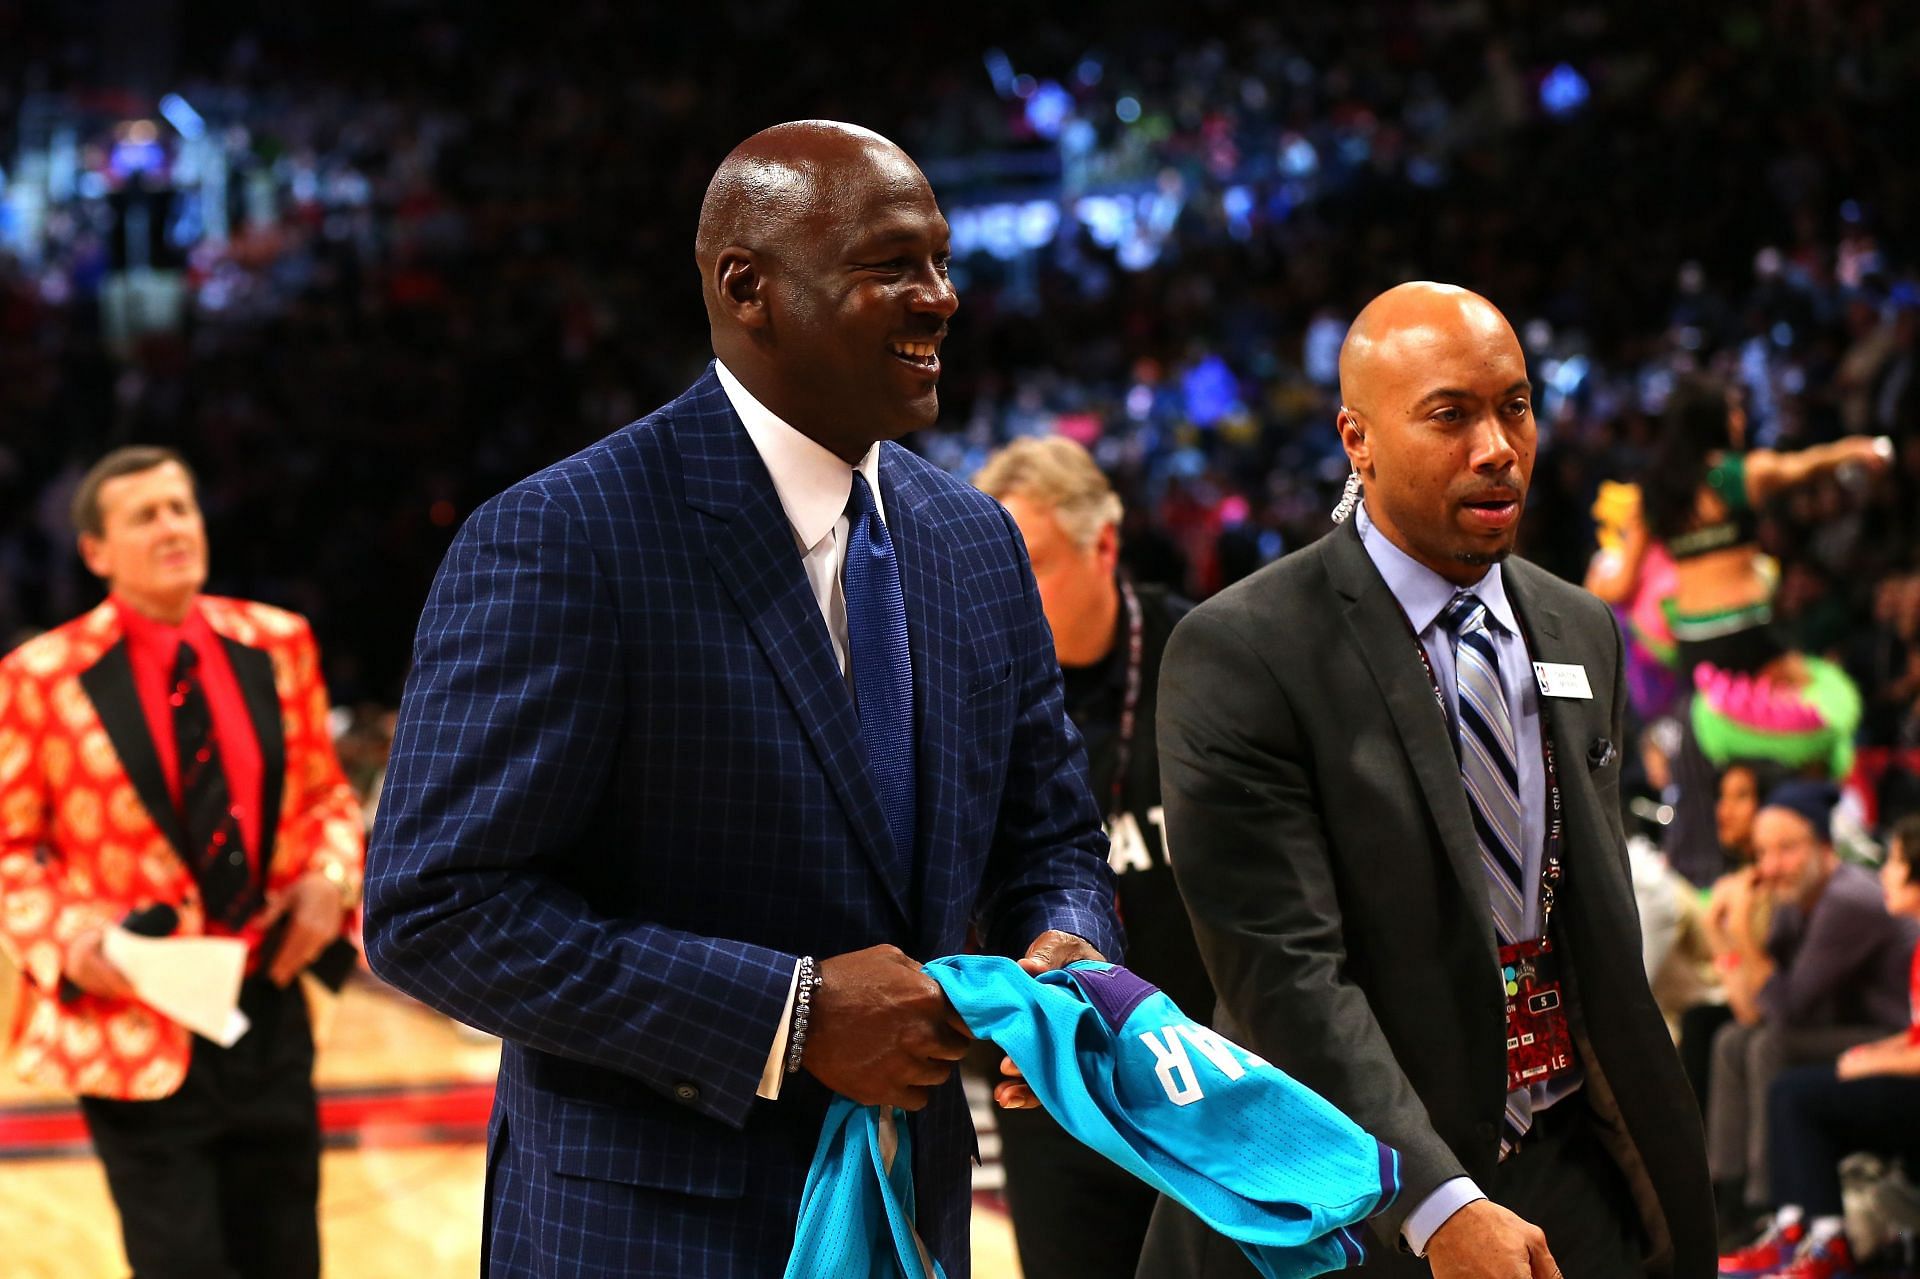 Hall of Famer and Charlotte Hornets owner Michael Jordan walks off the court during the NBA All-Star Game on Feb. 14, 2016, in Toronto, Ontario.